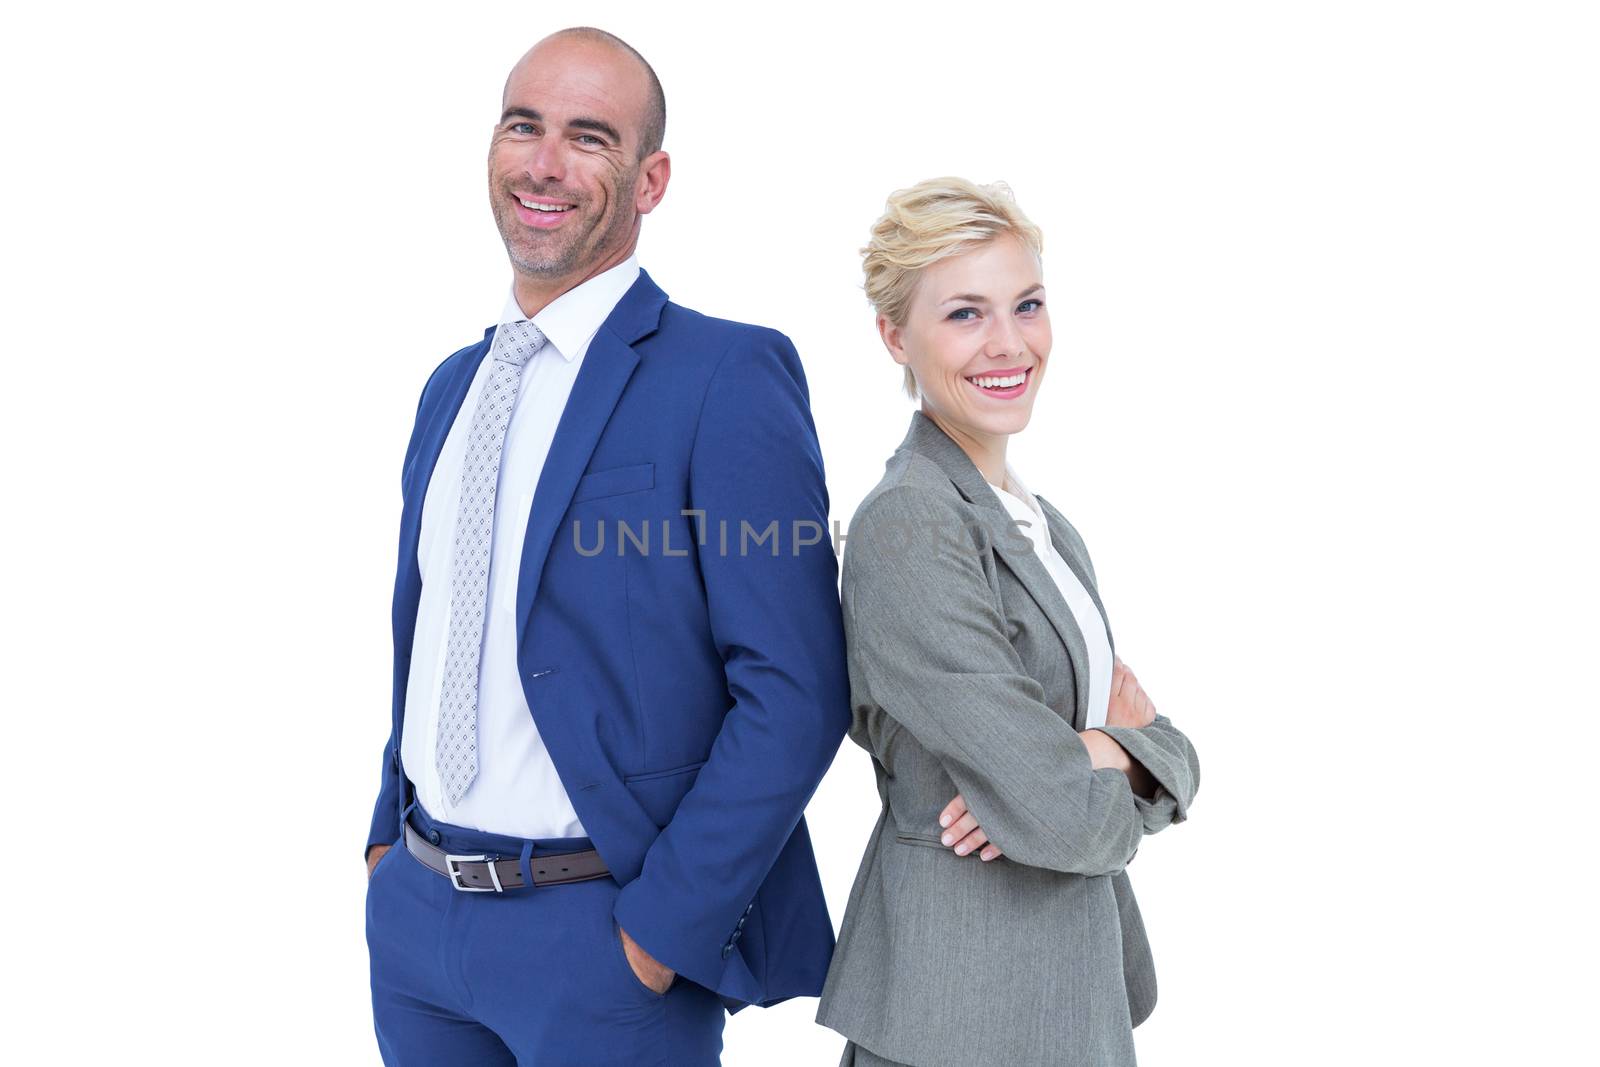 Smiling business people back-to-back with arms crossed